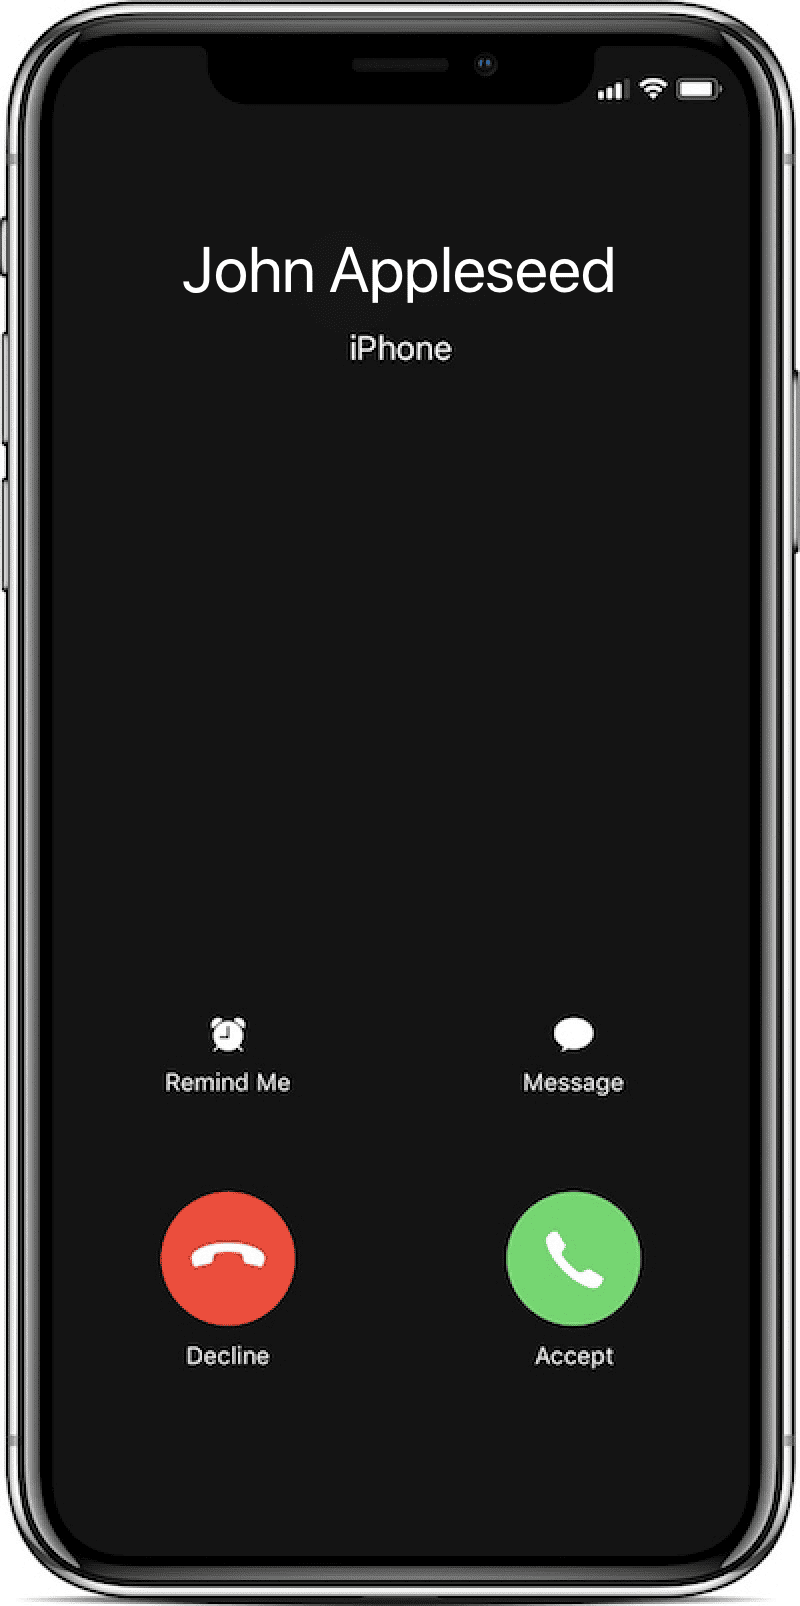 Image of iPhone X incoming call, which is experiencing a call delay bug.